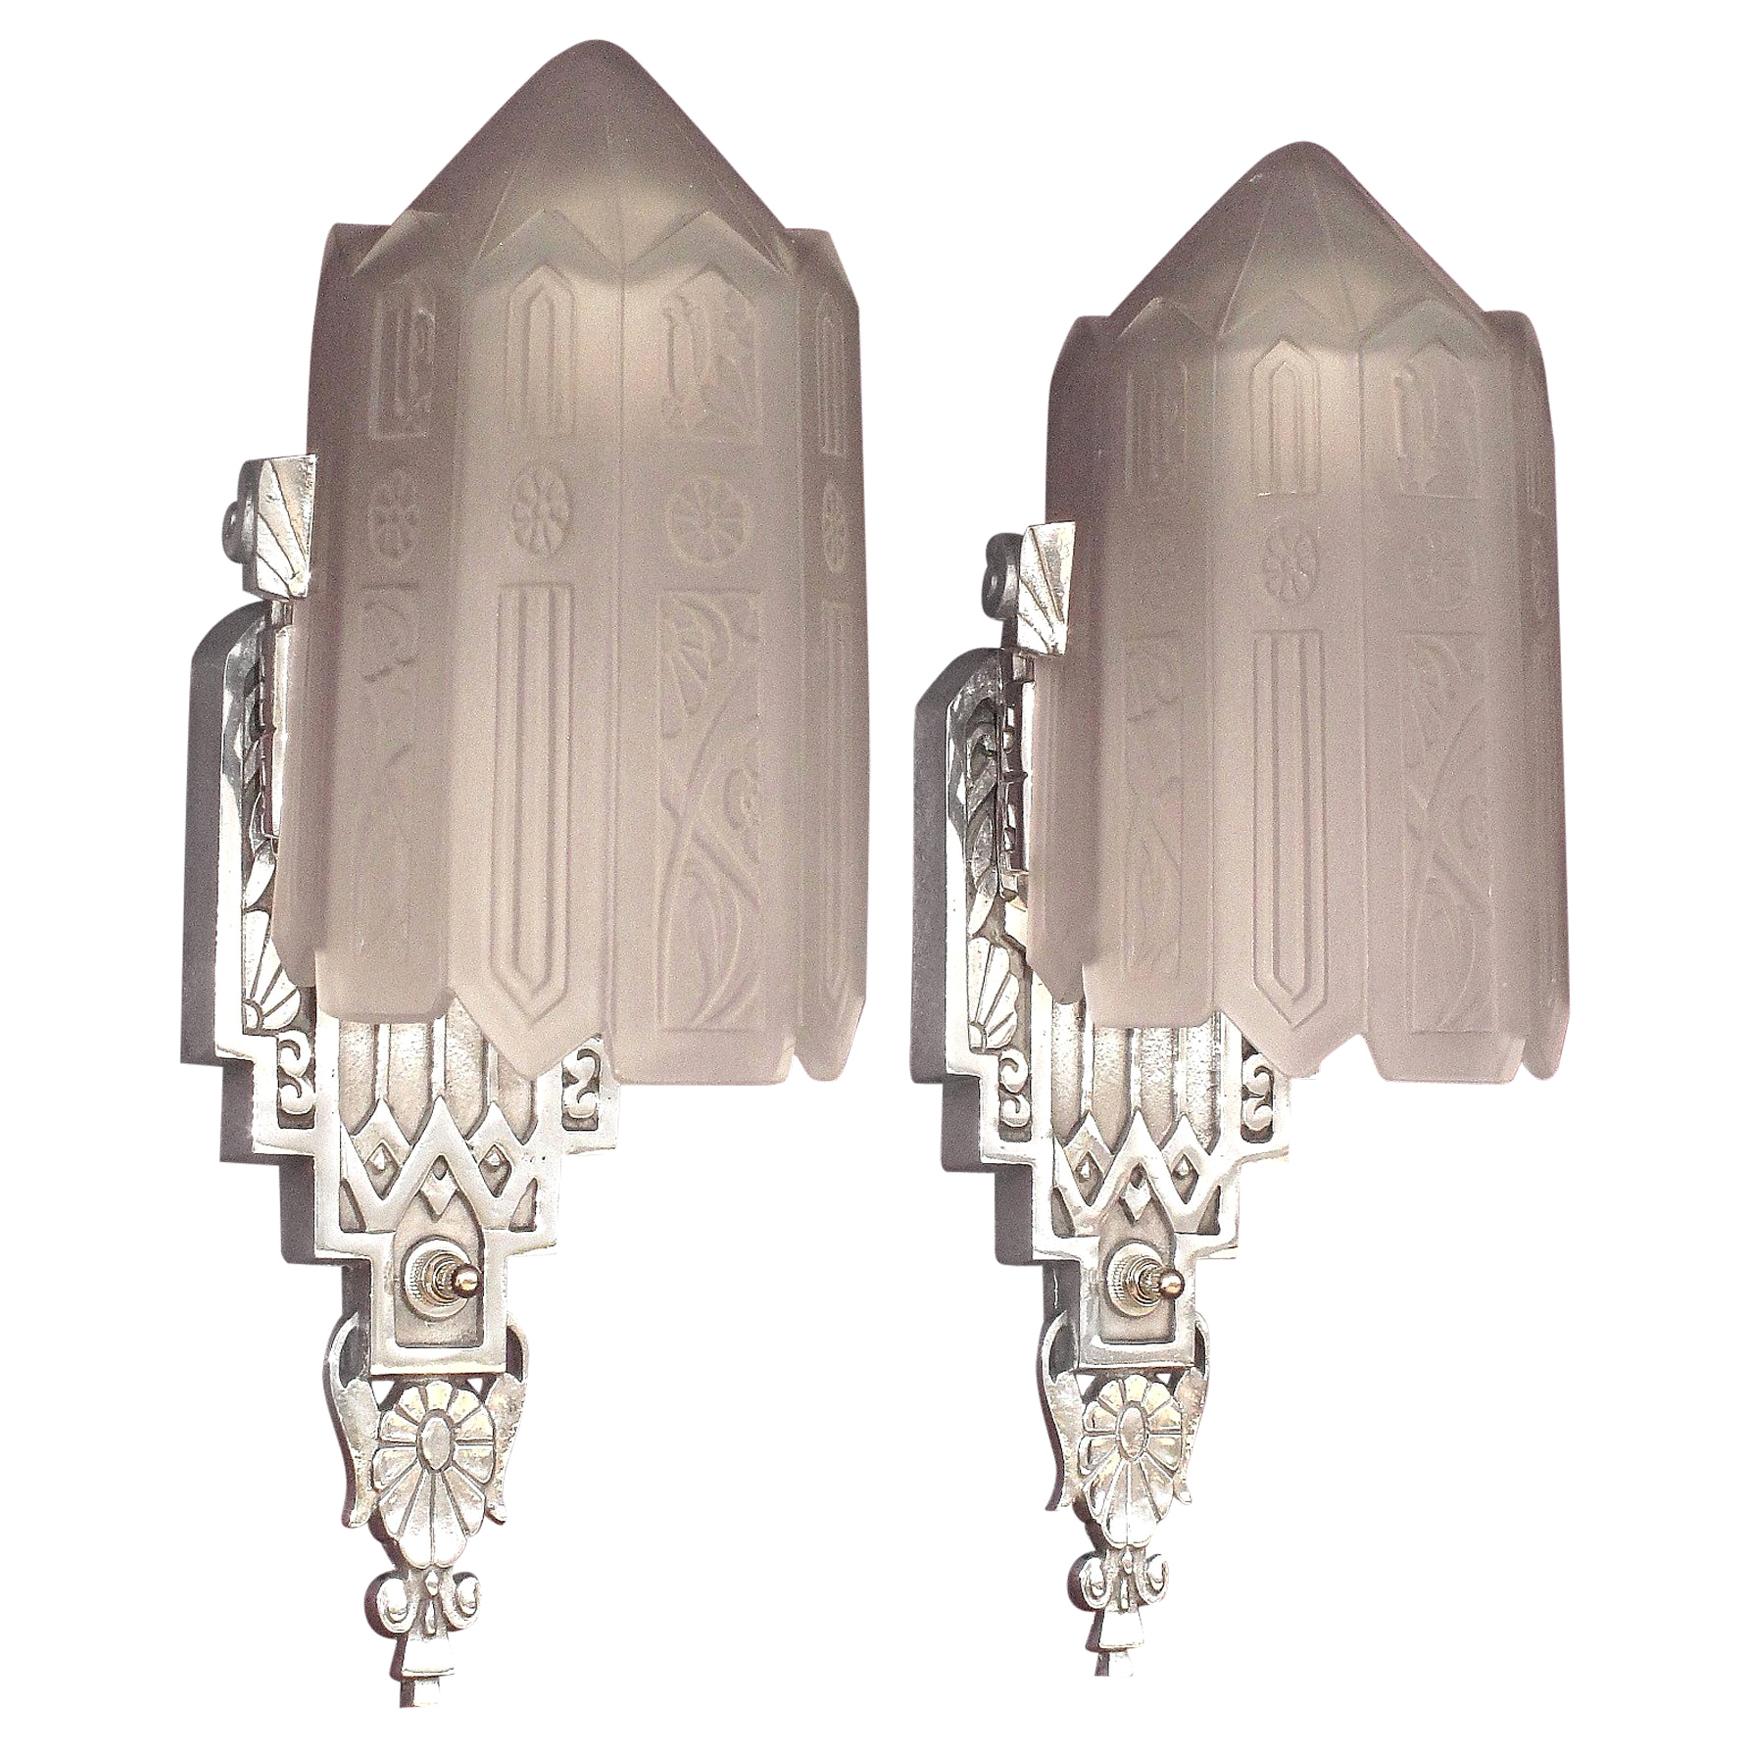 Very High Style Vintage American Art Deco Wall Sconces with Original Glass For Sale